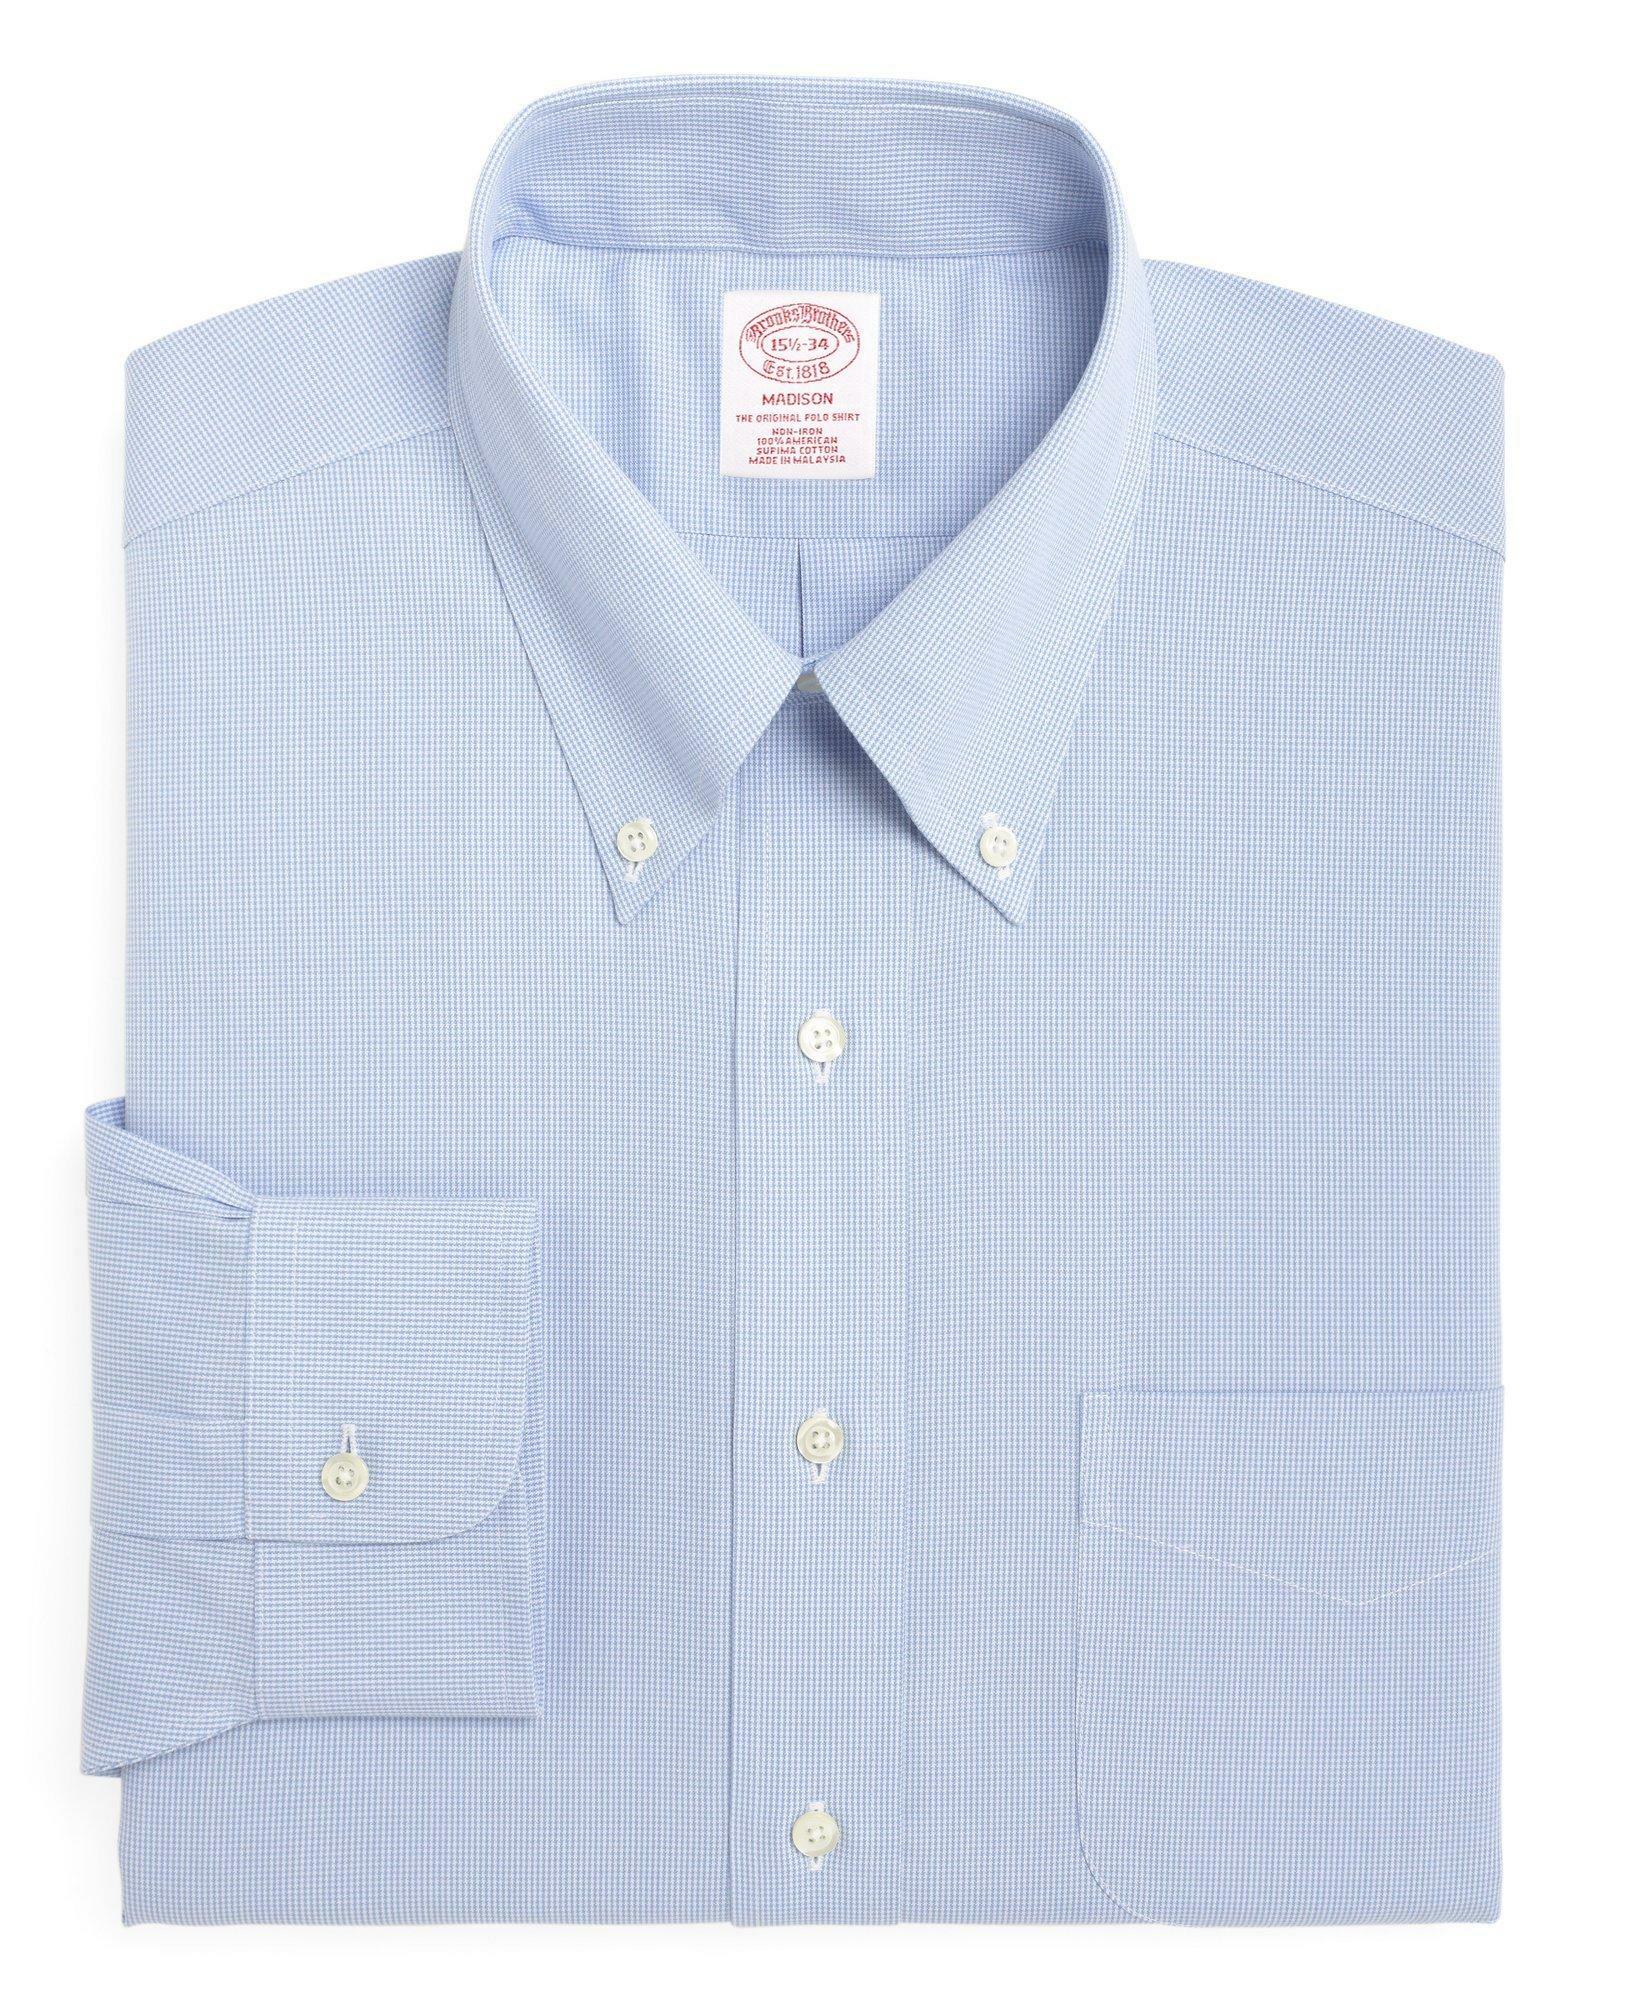 Brooks Brothers Men's Madison Relaxed-Fit Dress Shirt, Non-Iron Houndstooth | Light Blue